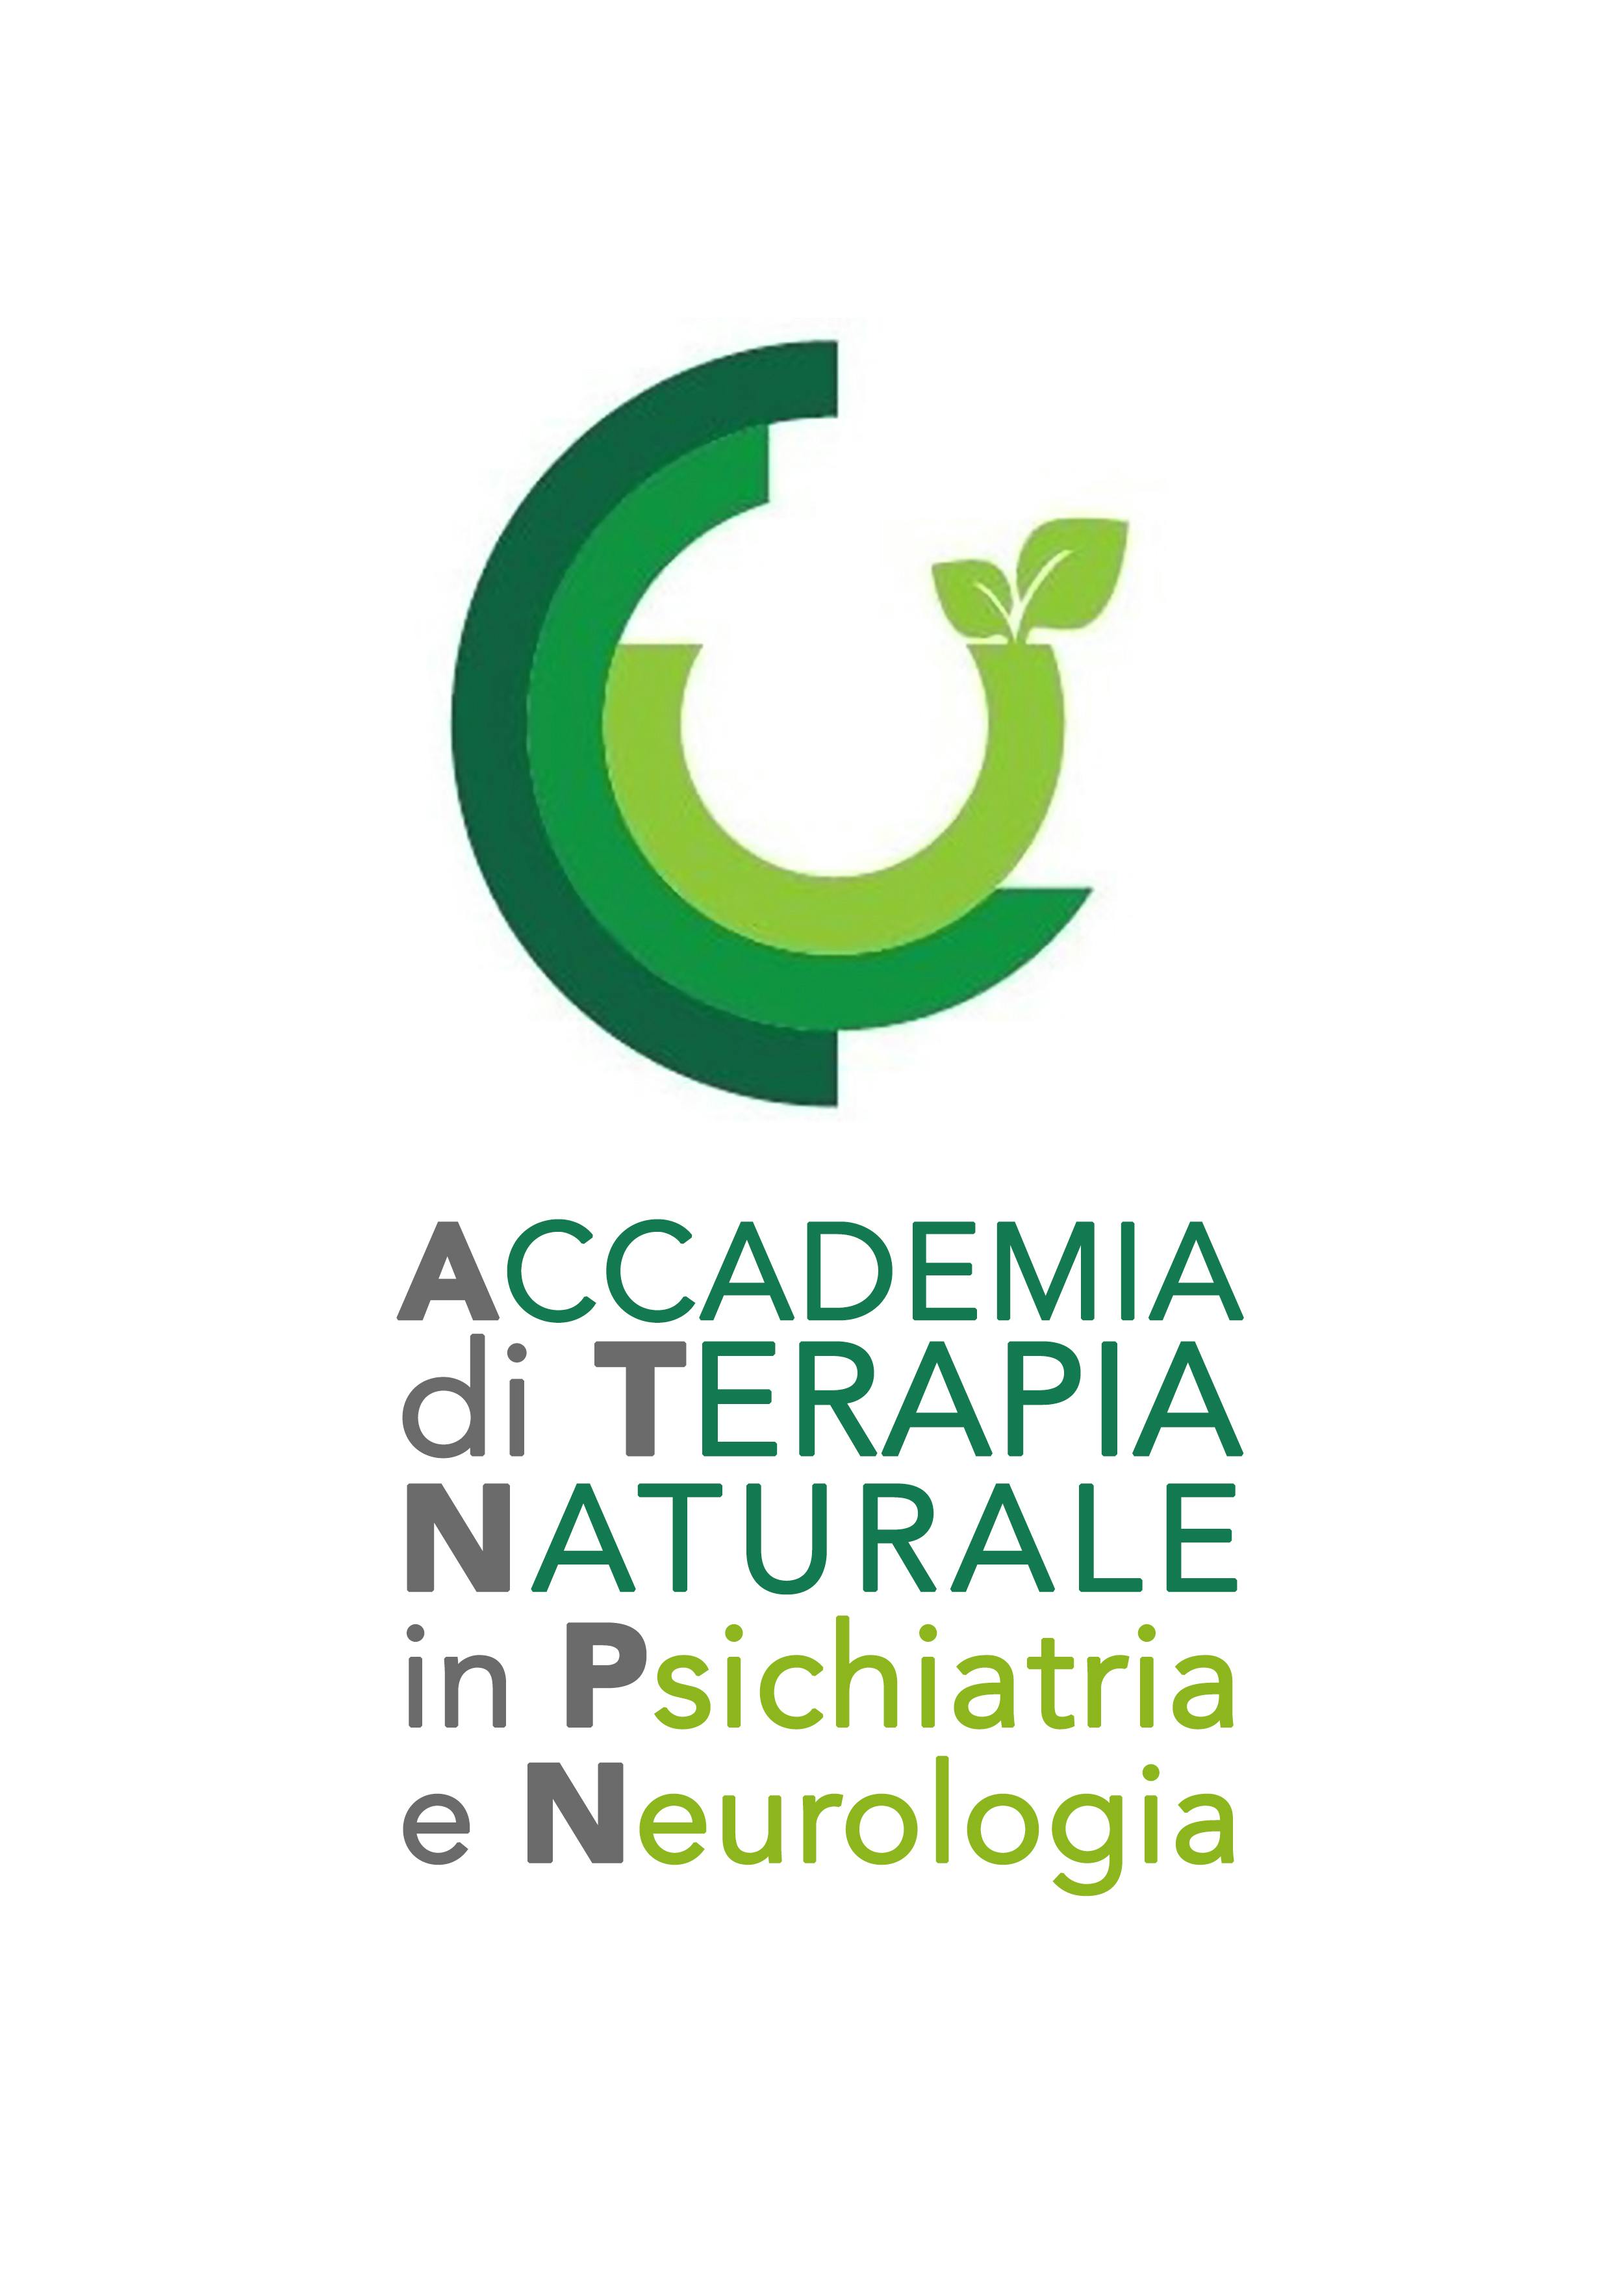 Logo of the italian Academy of Natural Therapy in Psychiatry and Neurology: three semicircles of different shades of green from which two green leaves arise.